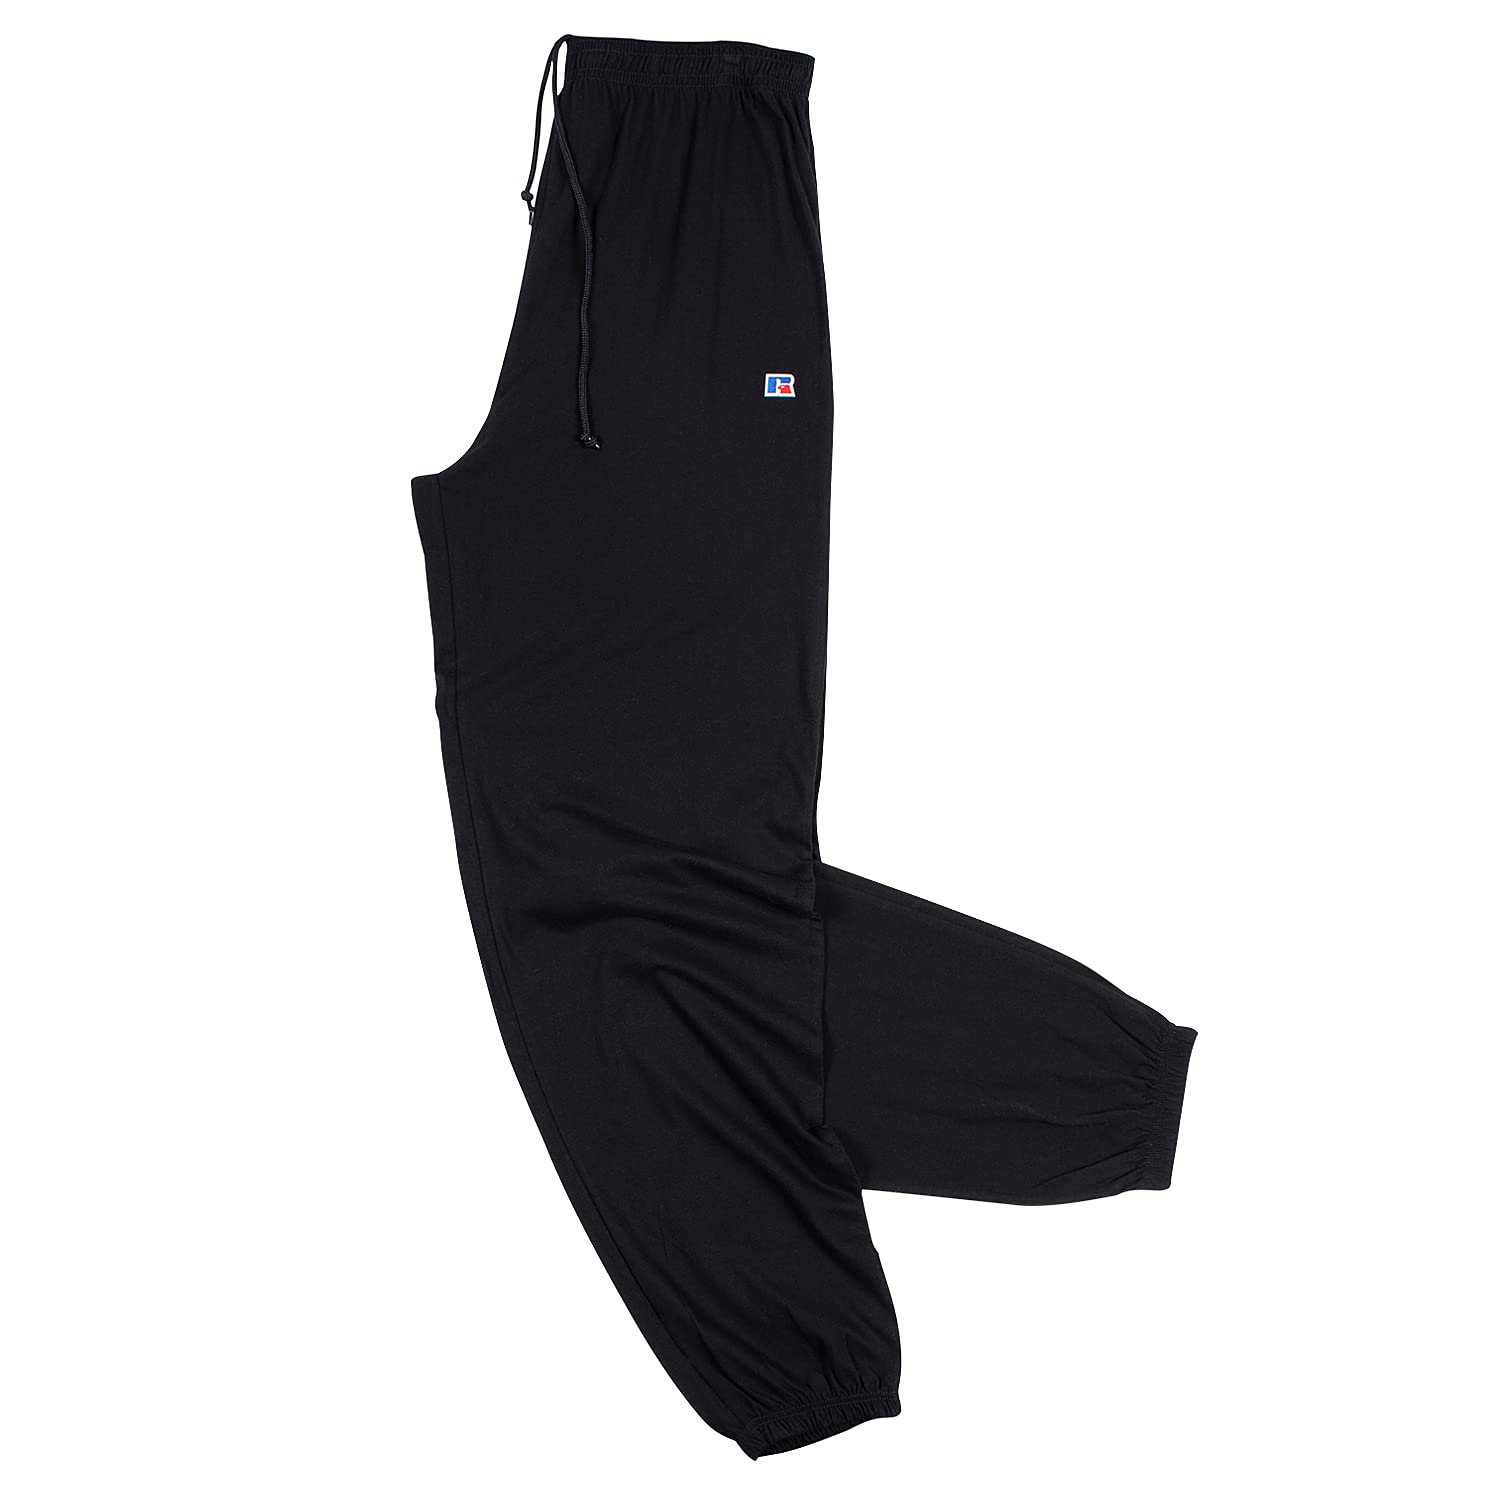 Russell Athletic Big and Tall Sweatpants for Men – Fleece Open